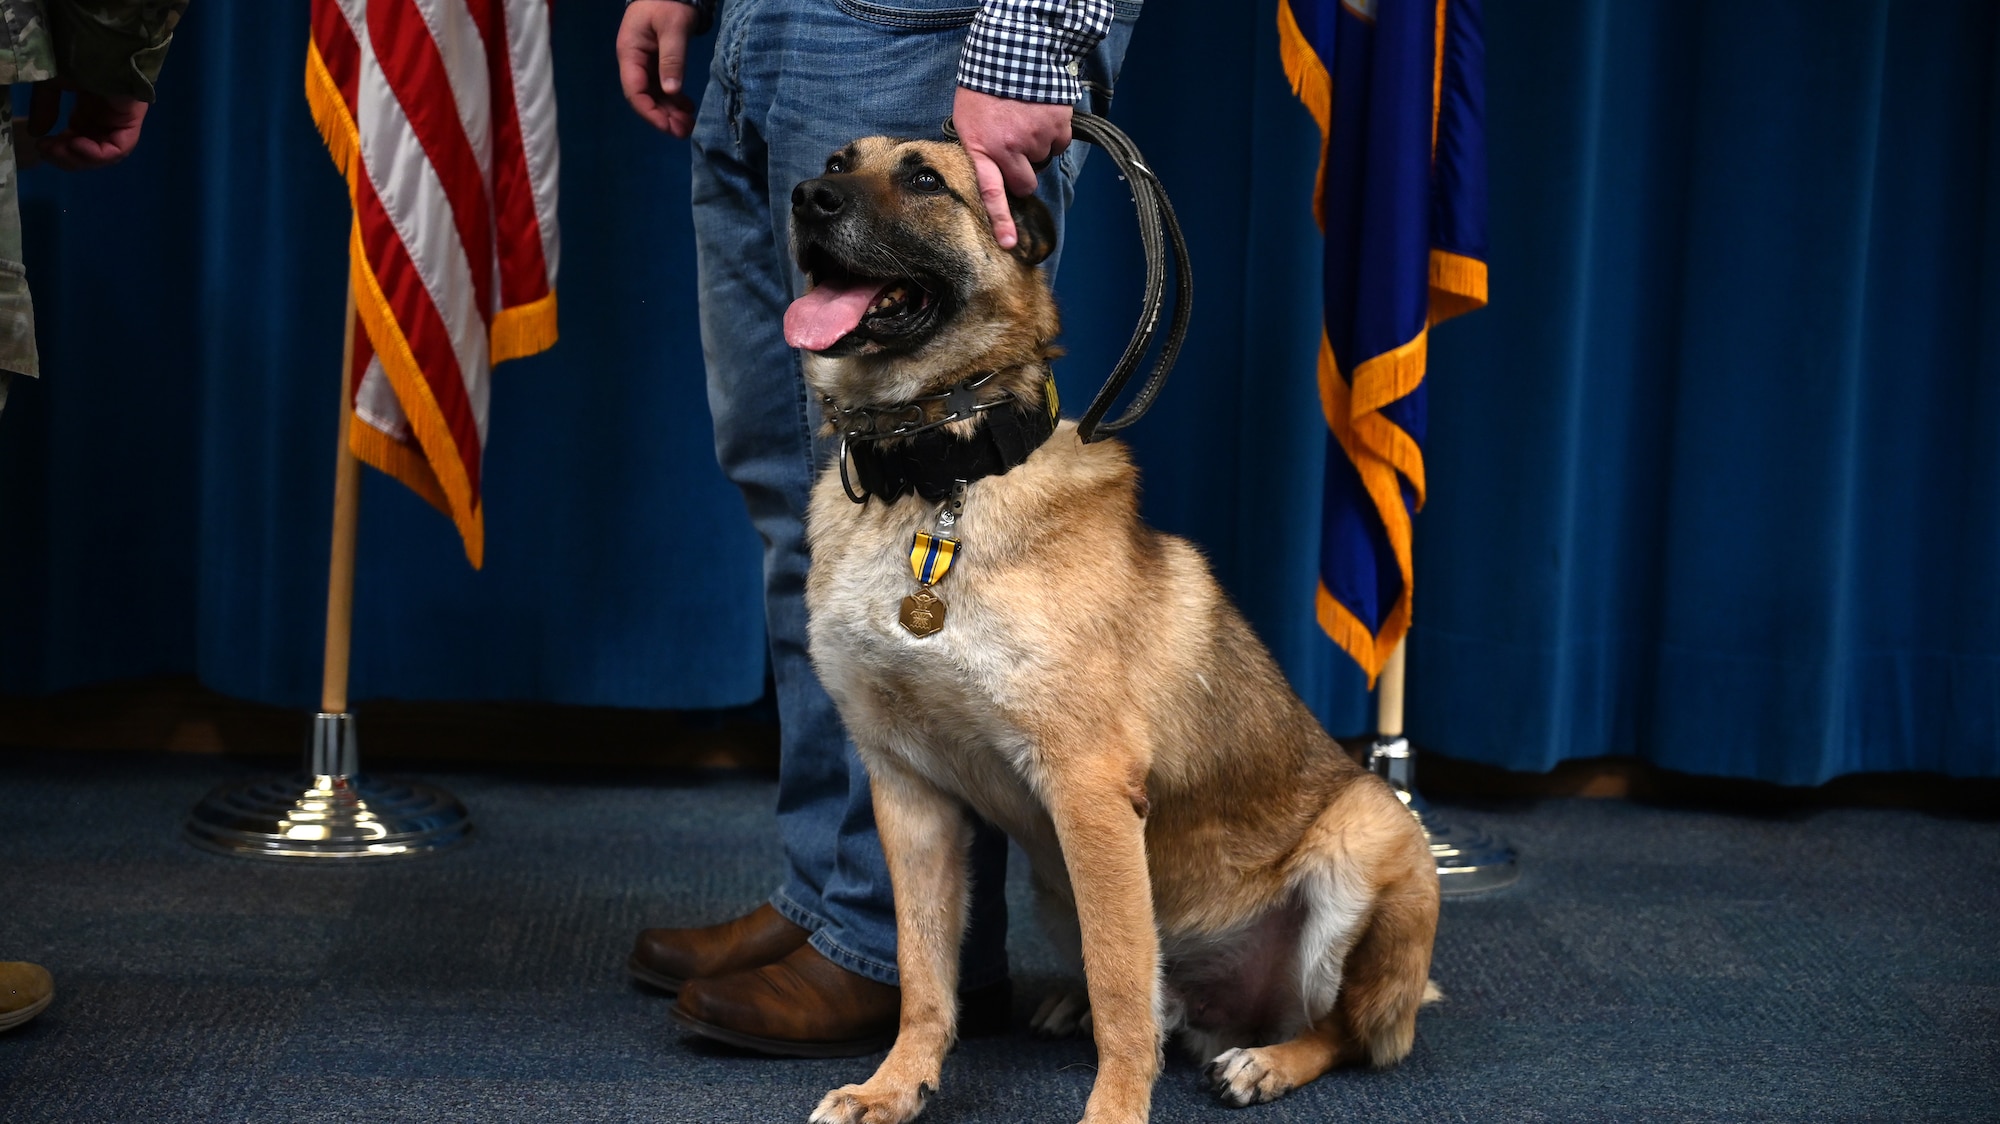 A dog poses with a medal on its collar.